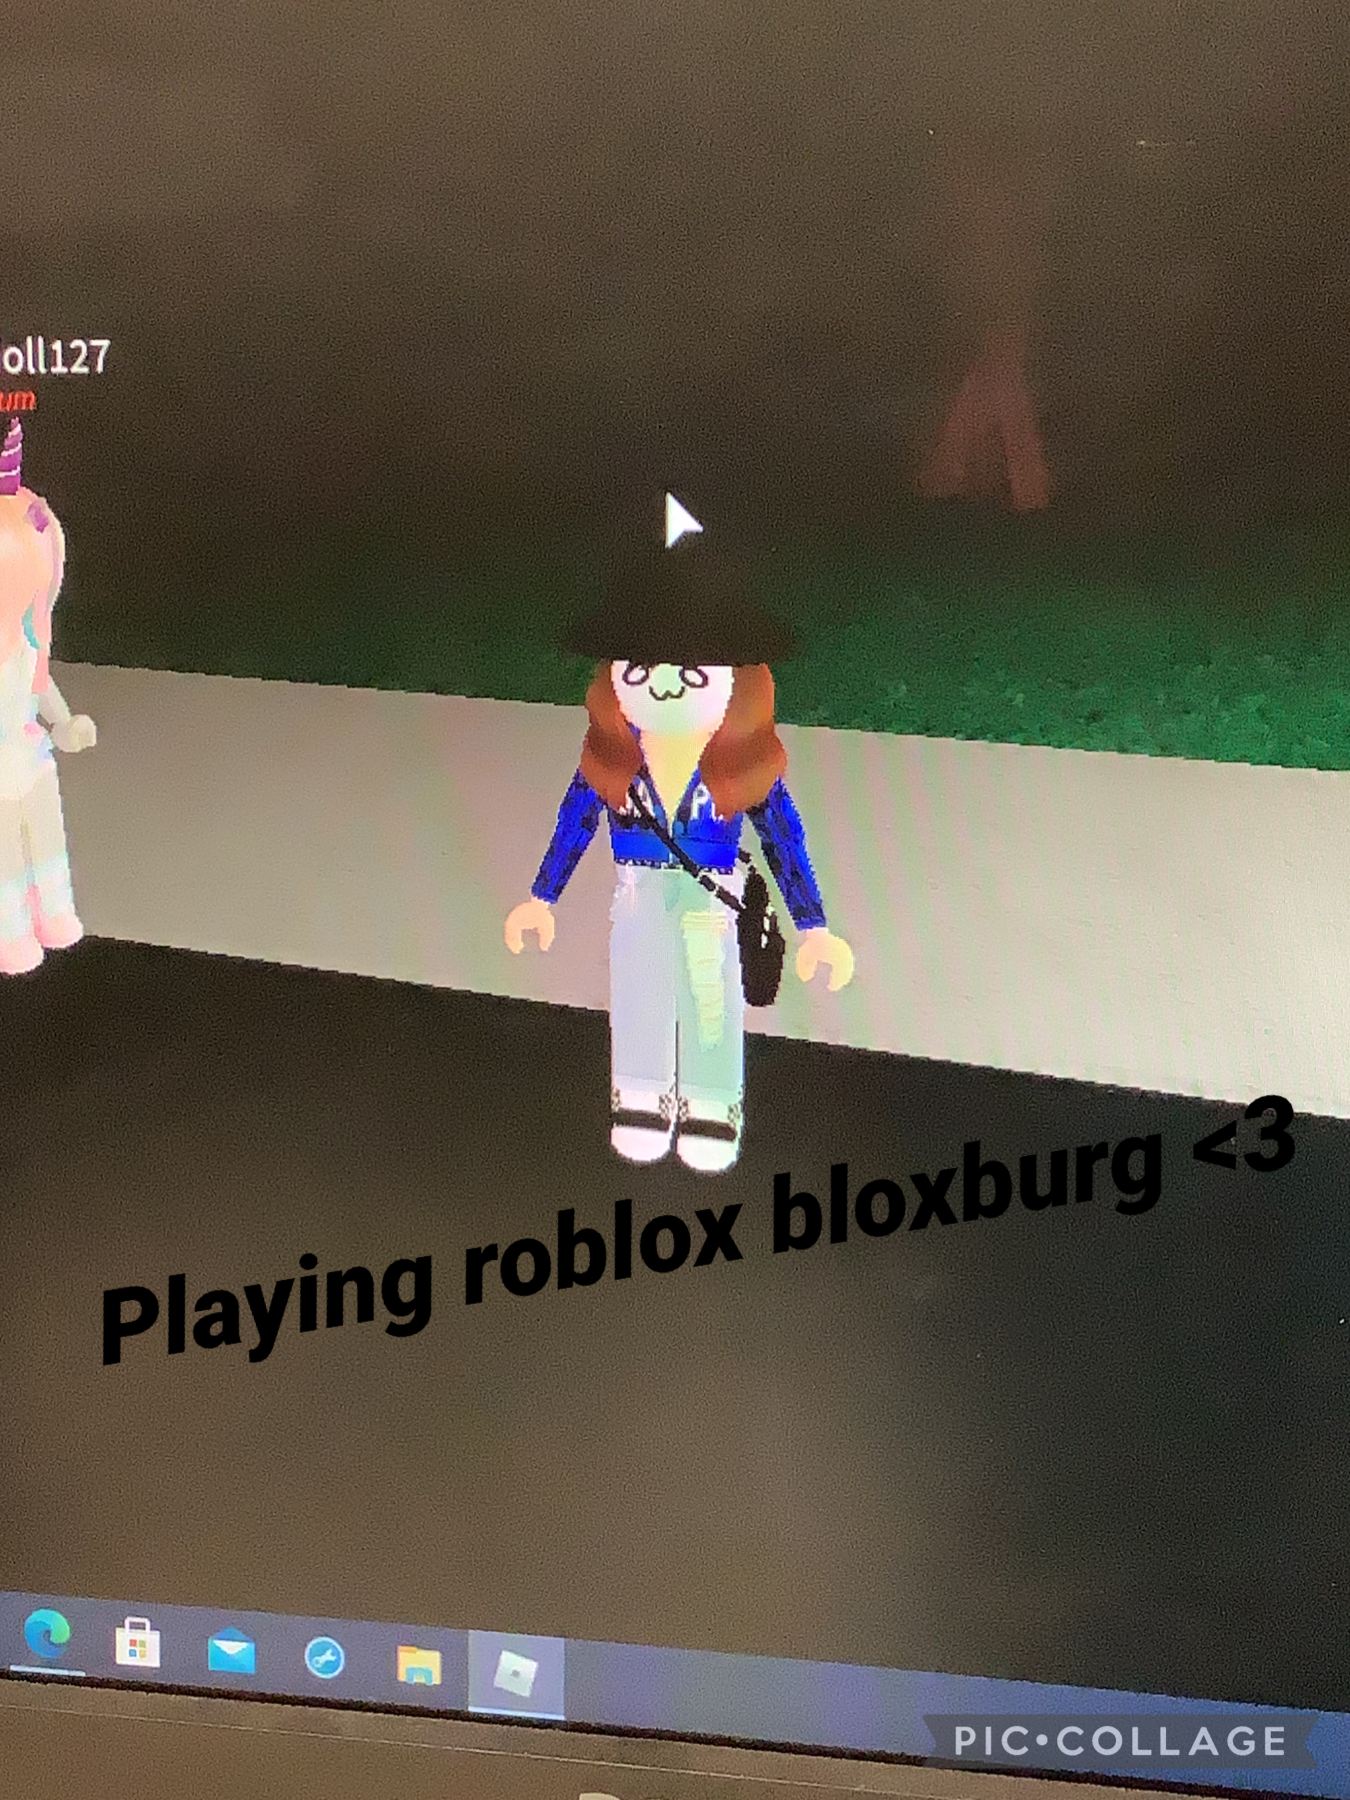 That girl was trying to get in my pic😡✨✨✨ #roblox #lol #fun #fyp 